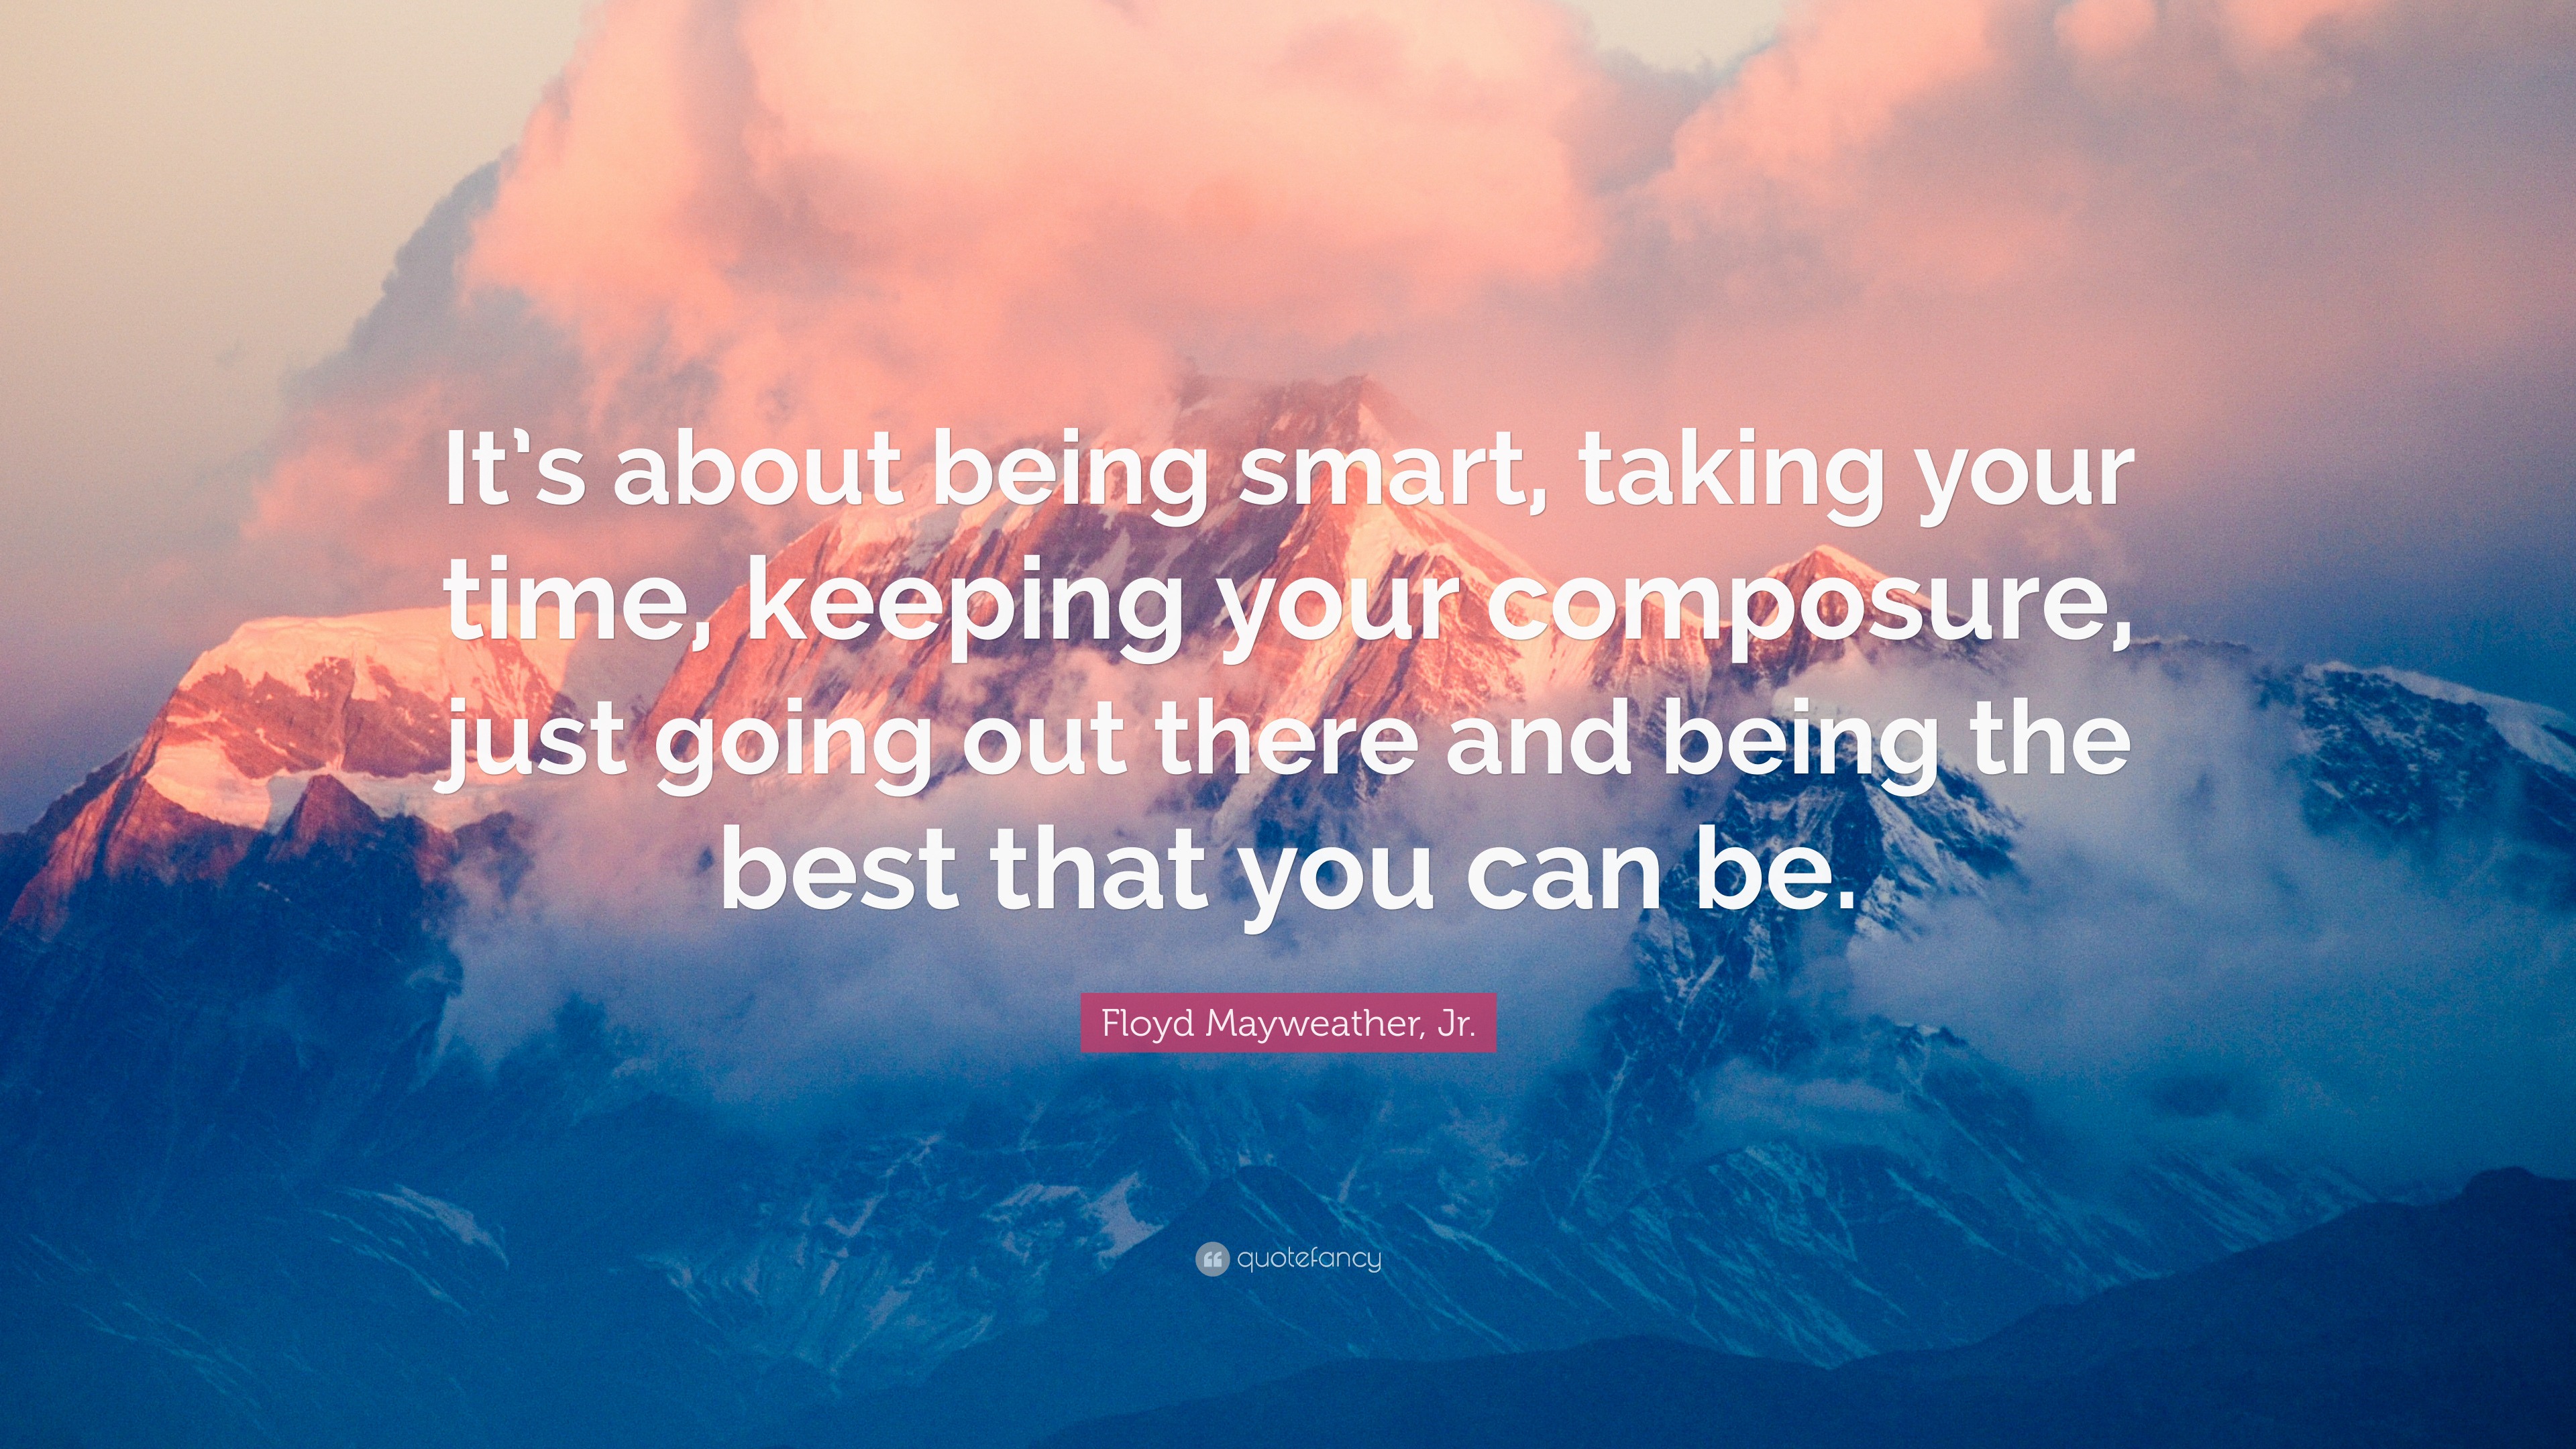 Floyd Mayweather, Jr. Quote: “It’s about being smart, taking your time